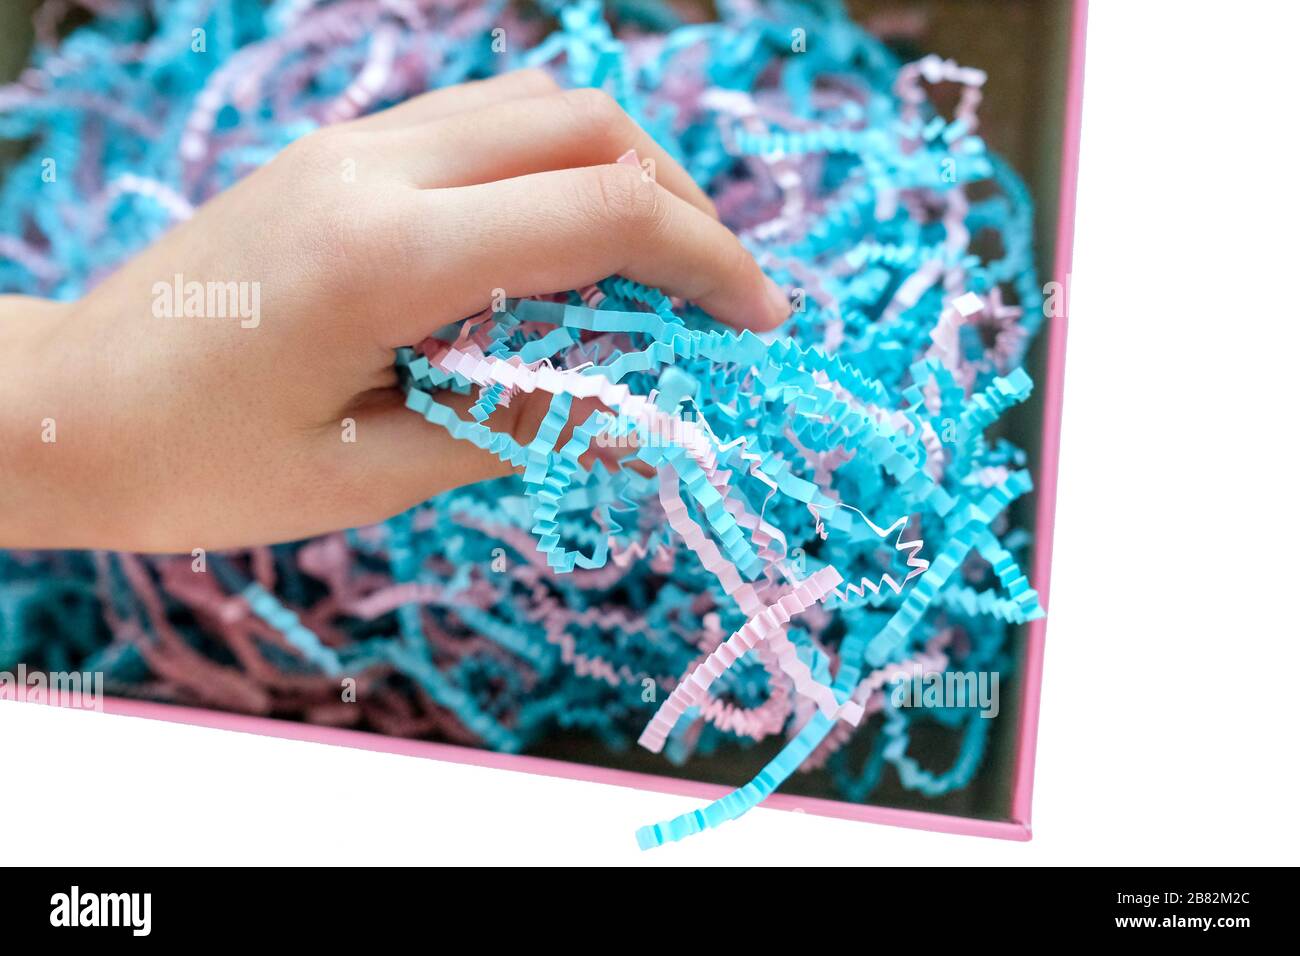 Paper shavings. Colored cut paper for packaging. Child's hand examines. Stock Photo